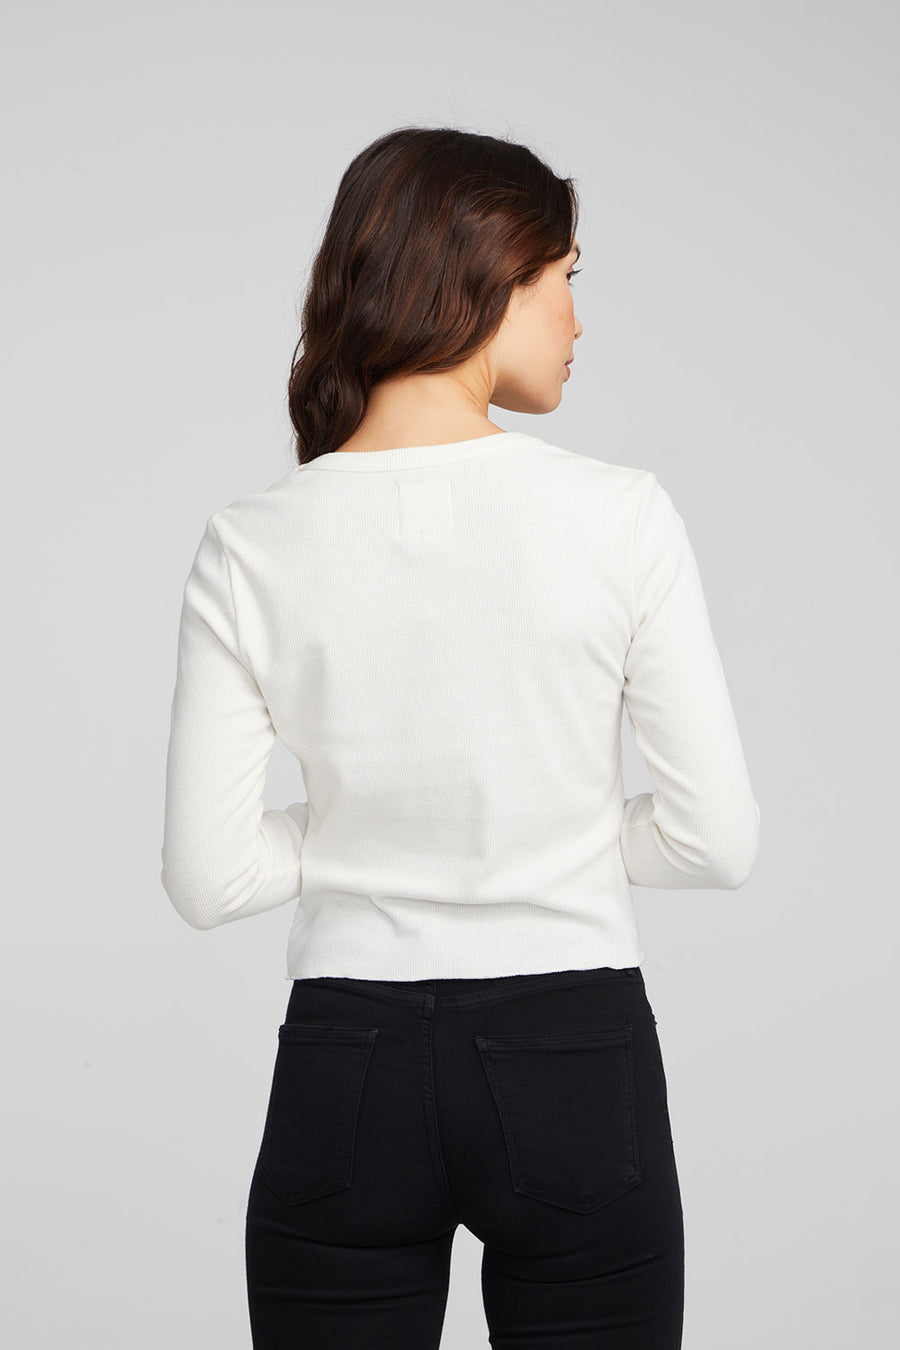 Moonlight Bright White Long Sleeve WOMENS chaserbrand